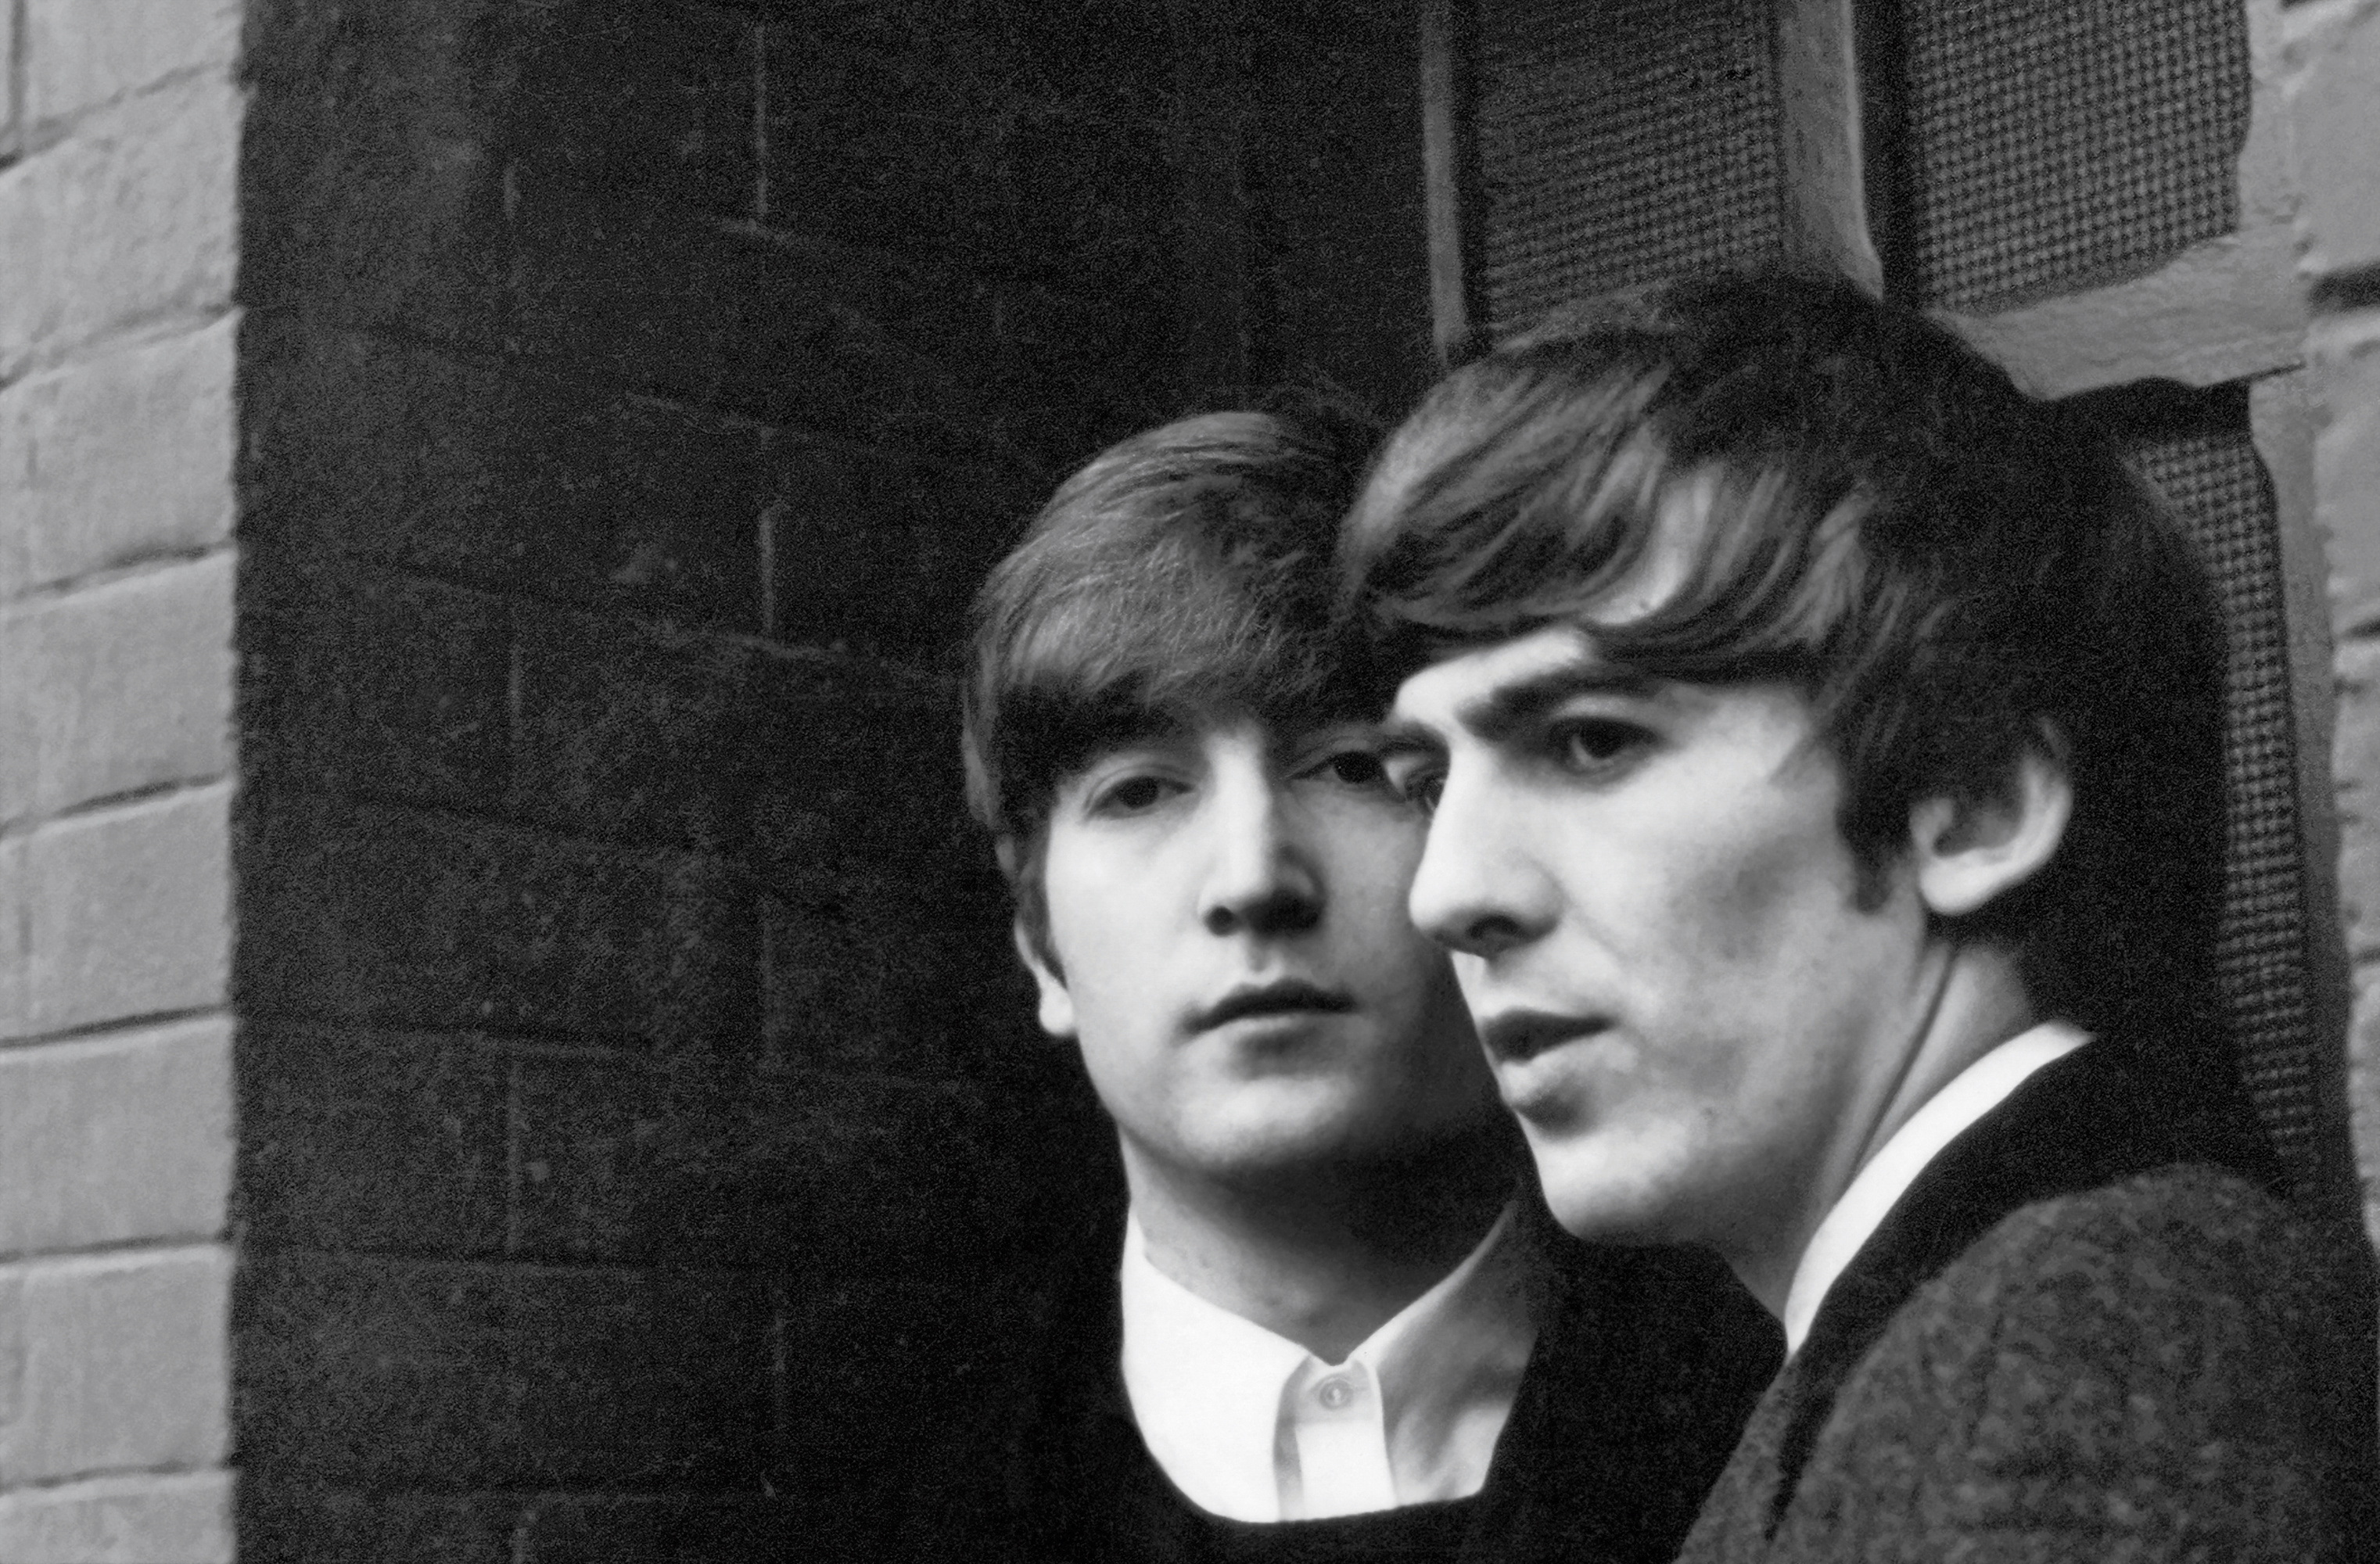 'Paul McCartney Photographs 1963-64: Eyes of the Storm' exhibition at the National Portrait Gallery in London